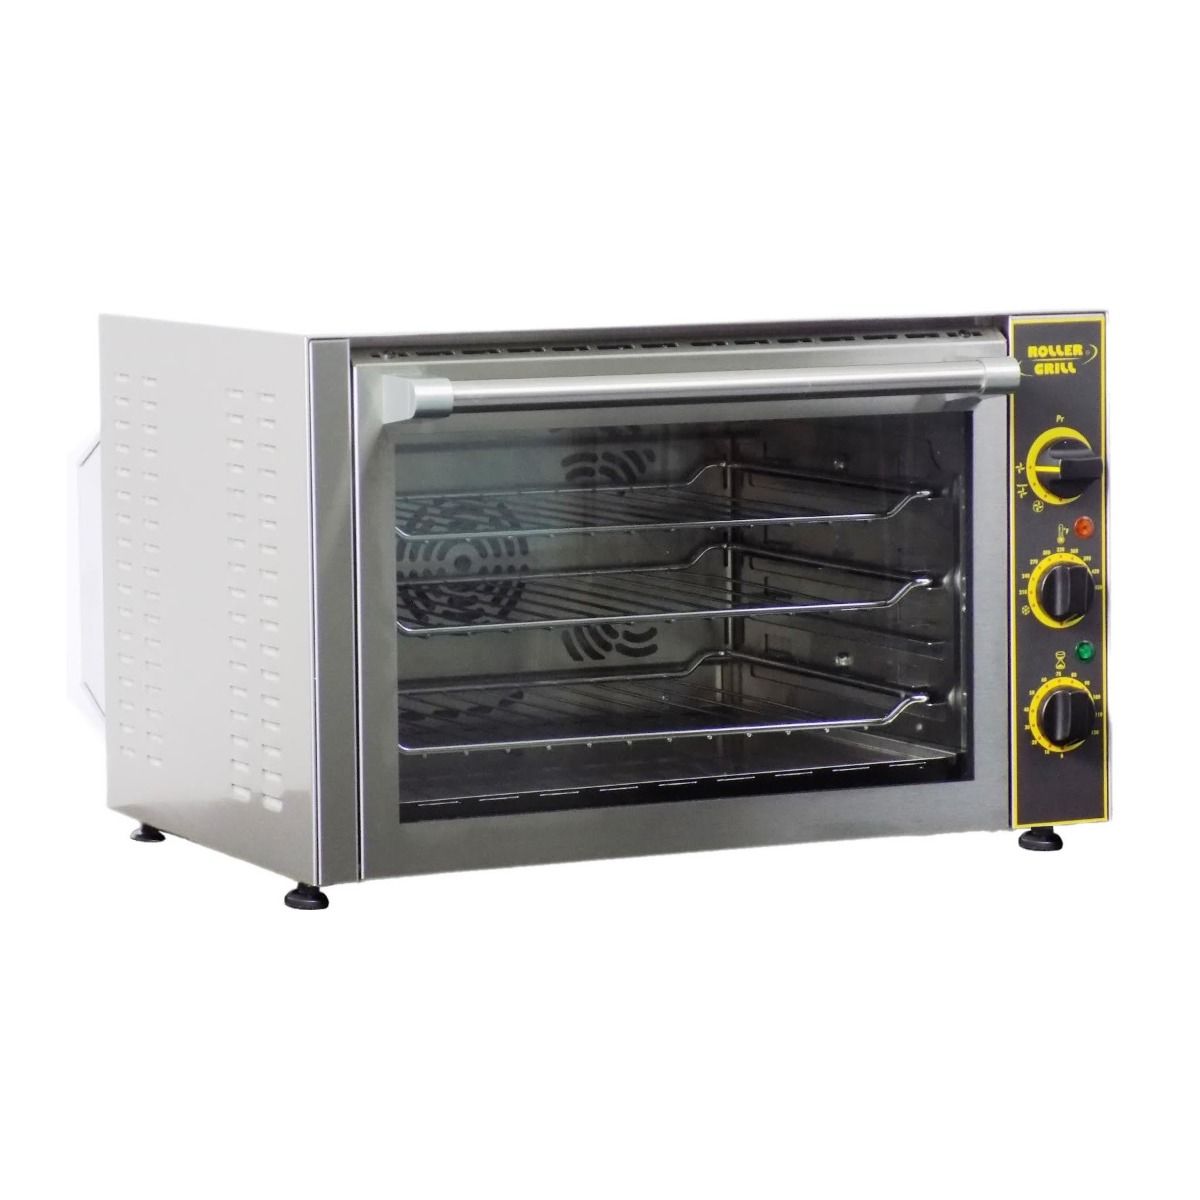 https://static.restaurantsupply.com/media/catalog/product/cache/58705eee992a0d7bab305099af29f9ee/e/q/equipex-fc-33-tempest-22-wide-electric-quarter-size-countertop-convection-broiler-oven-208-240v-3kw.jpg